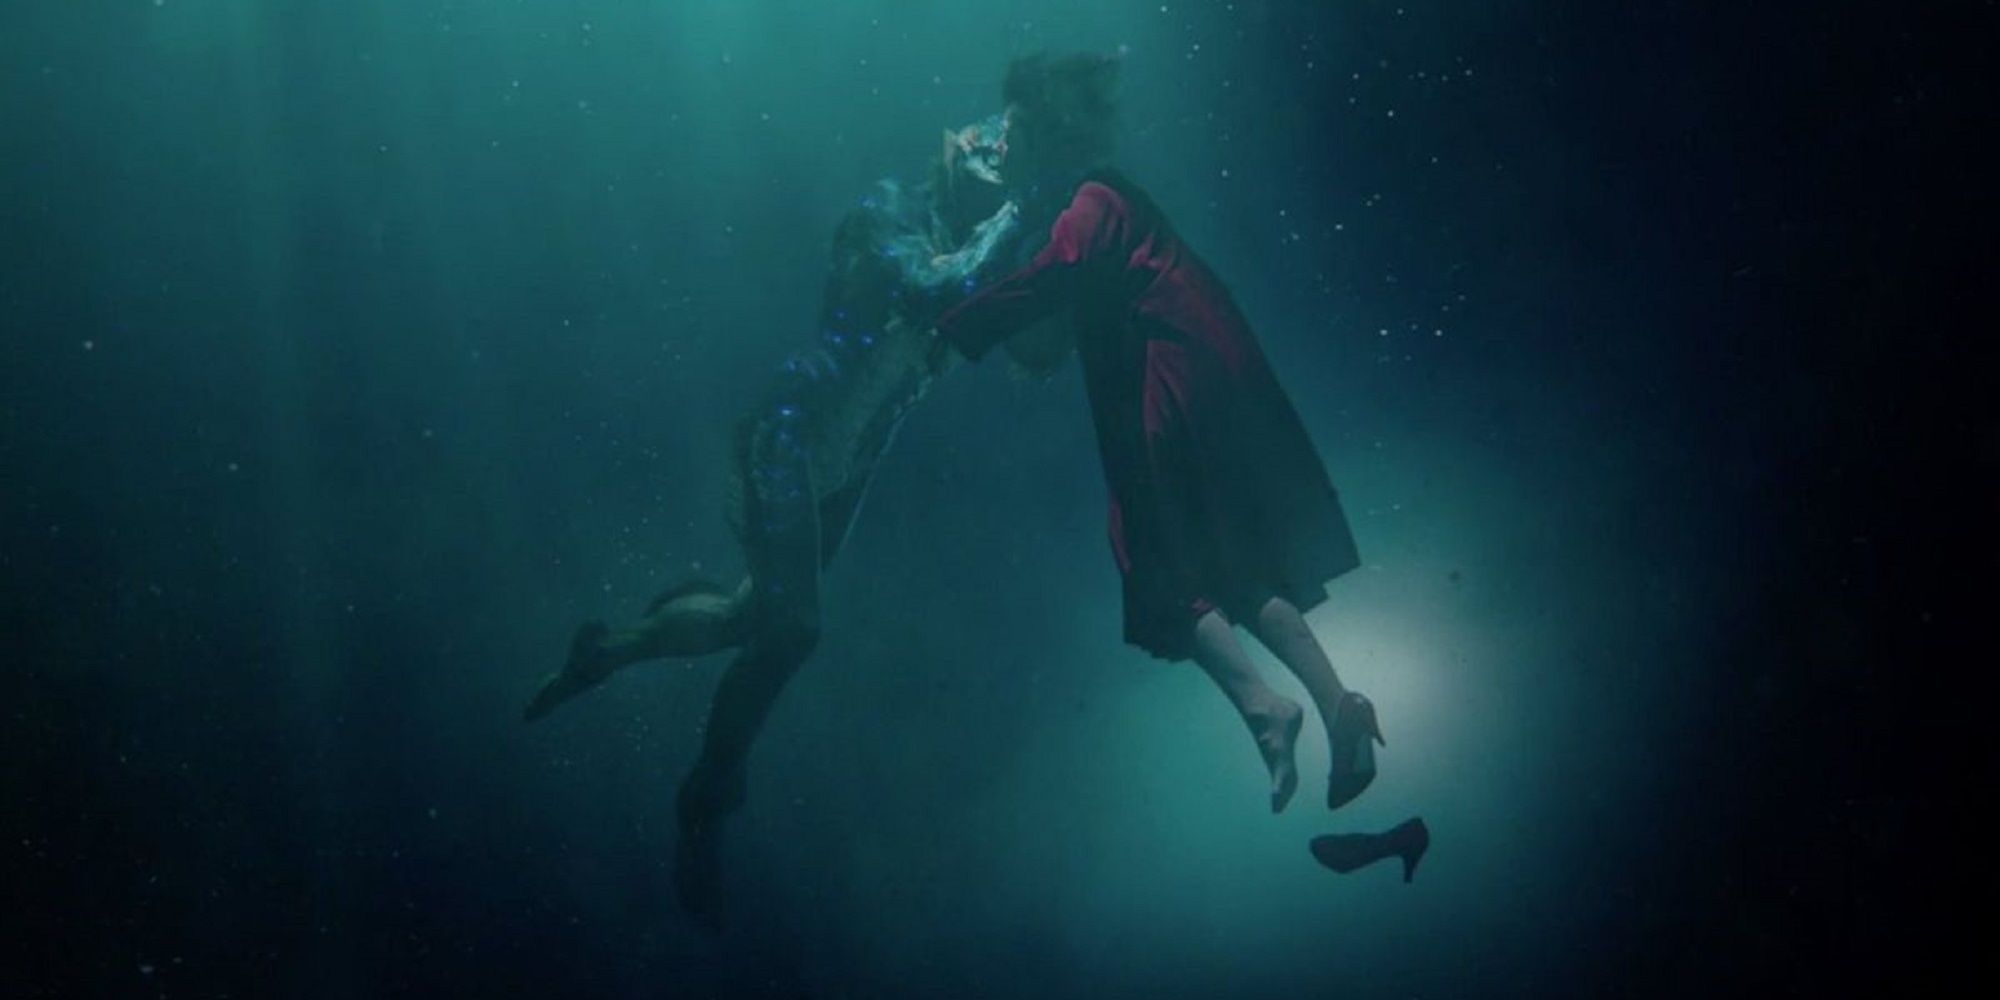 Eliza and the Amphibian Man kissing underwater in The Shape of Water.